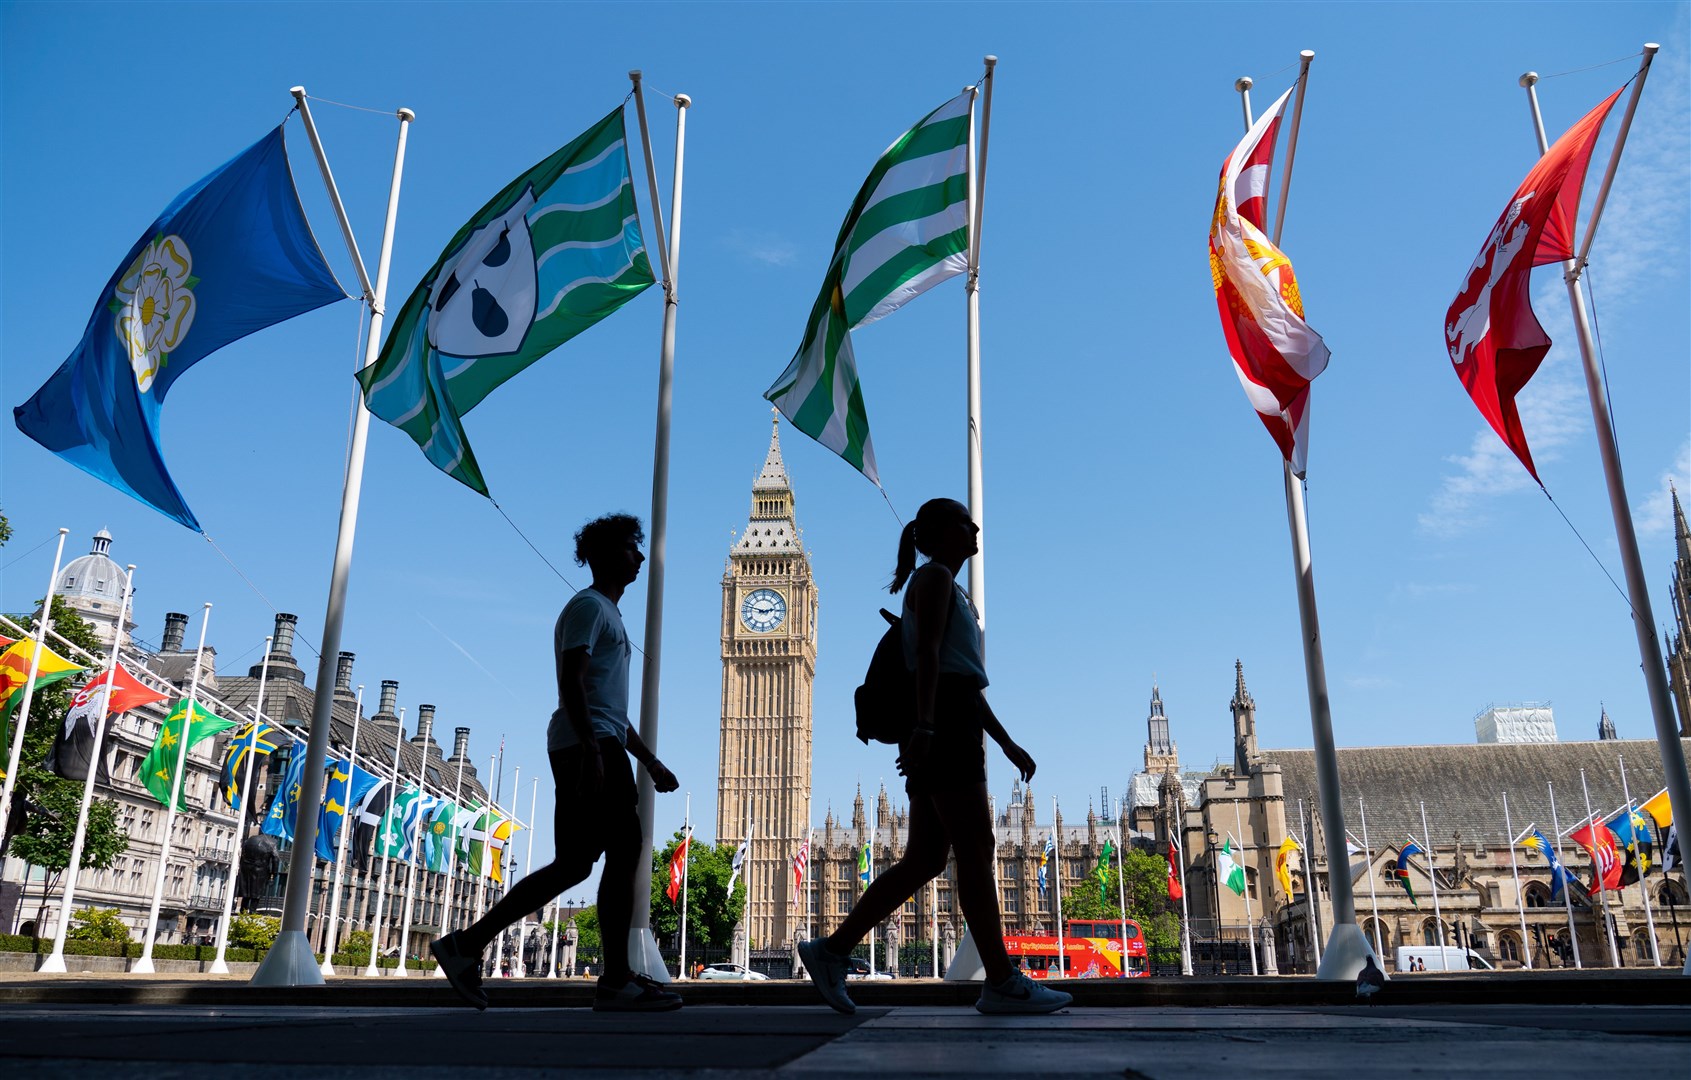 People walk in the shade past national flags in Parliament Square, central London (Dominic Lipinski/PA)